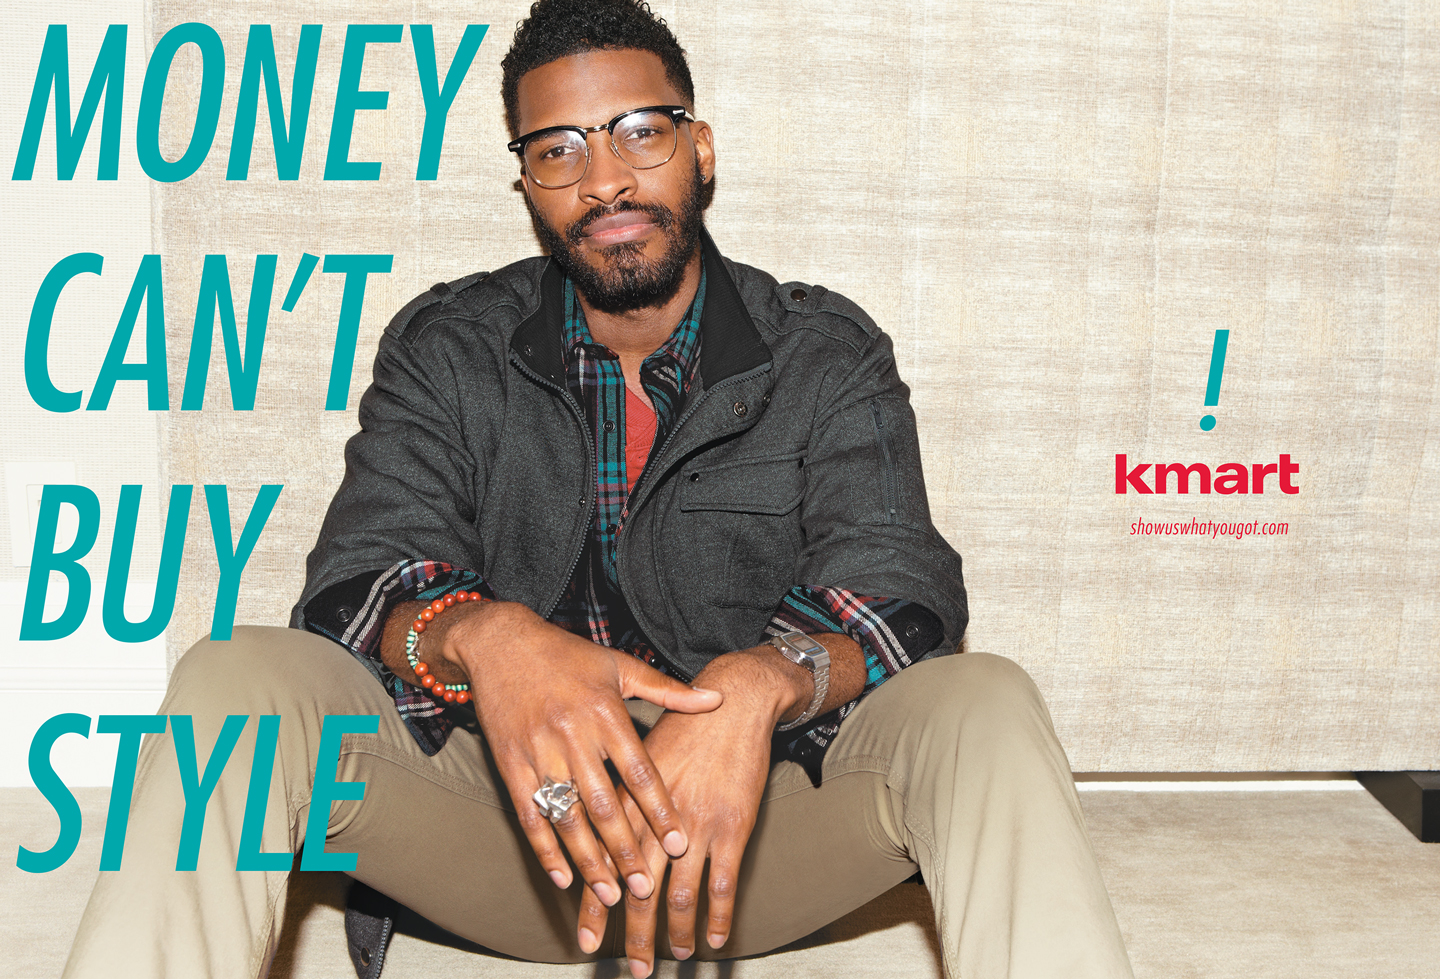 Kmart, Money Can't Buy Style '11, spread ad